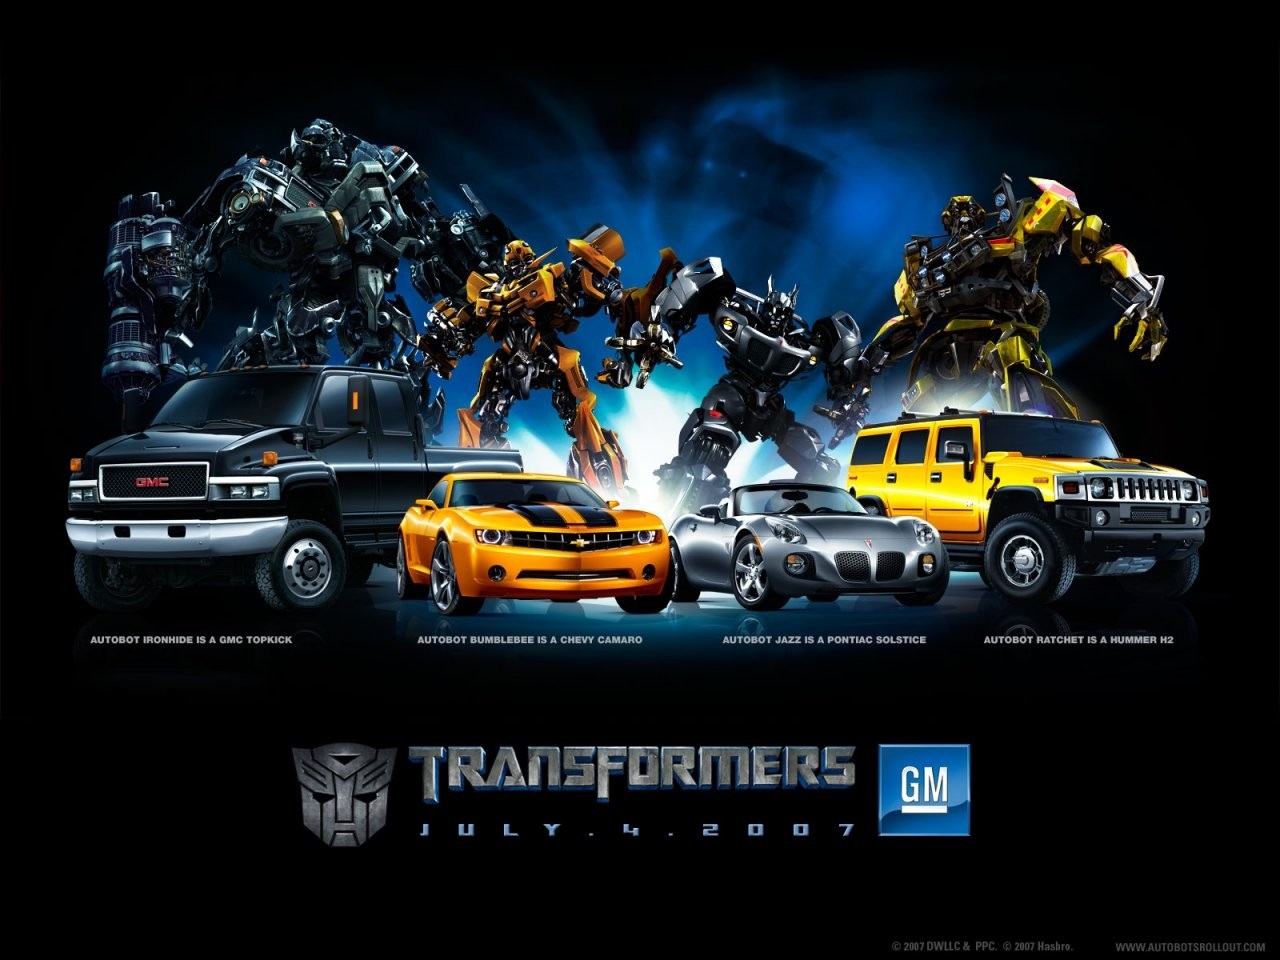 Transformers Car Wallpaper Image Amp Pictures Becuo